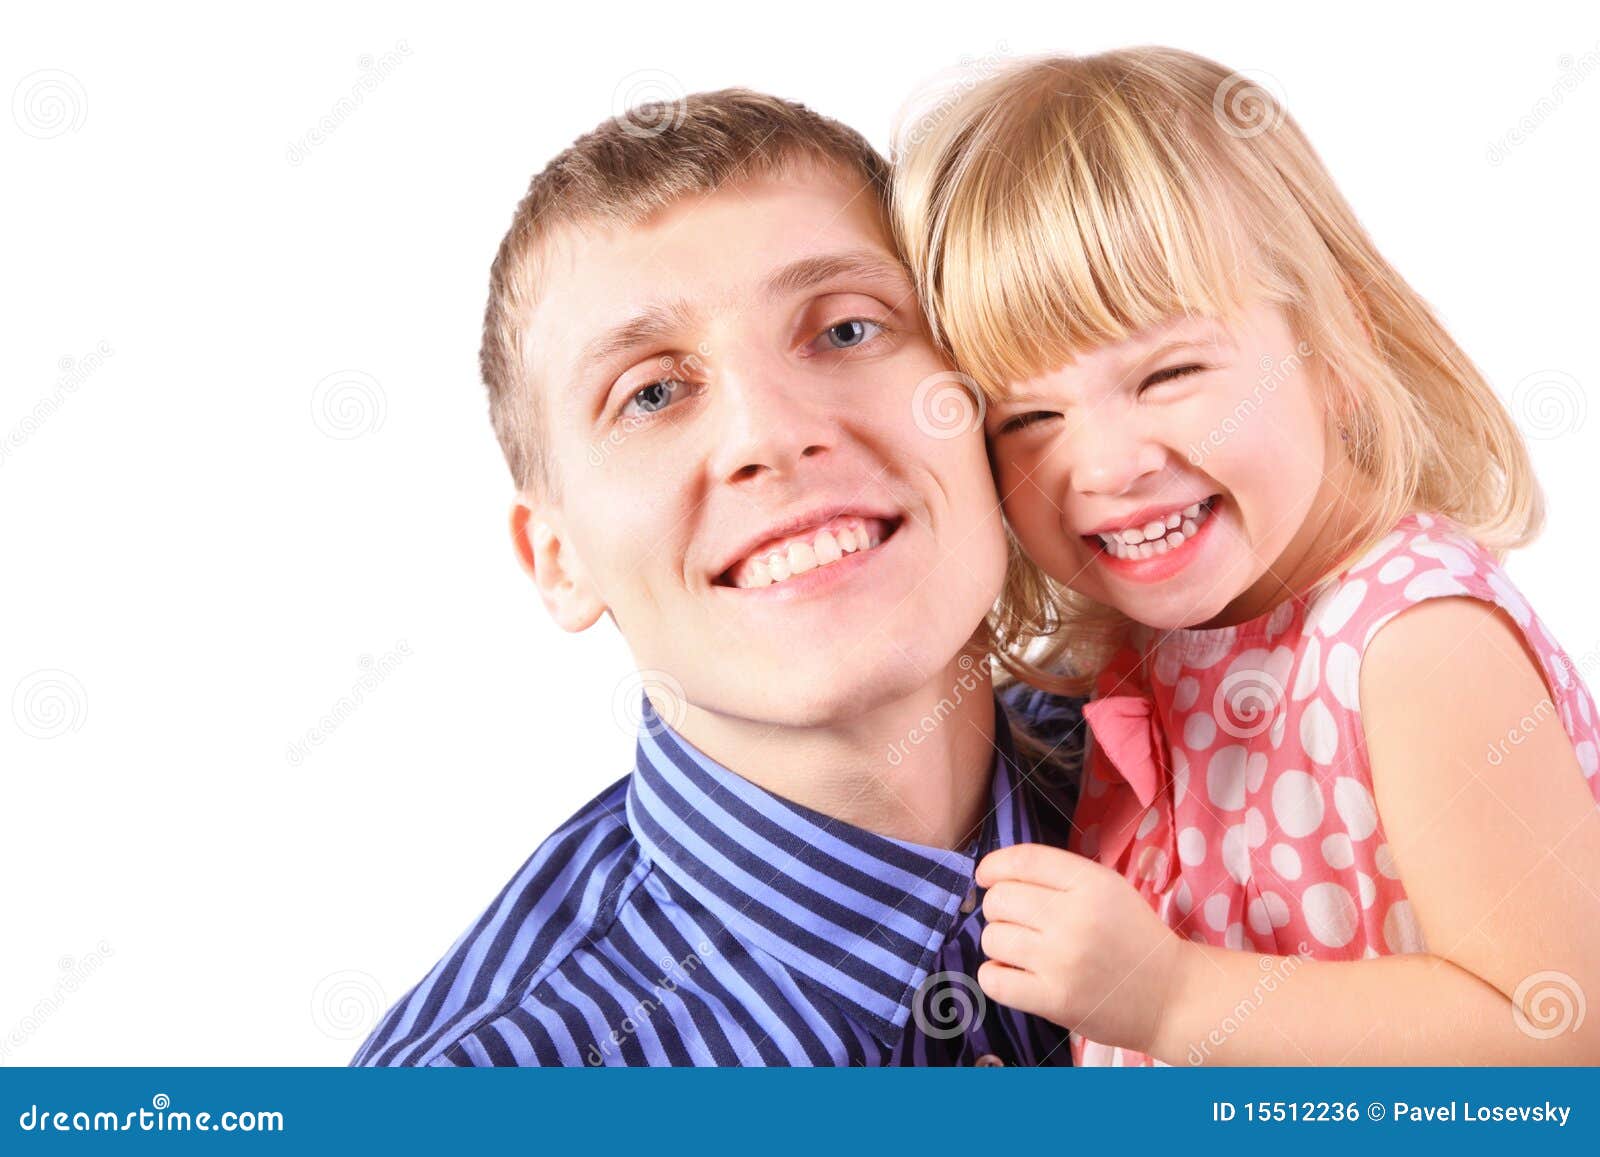 little girl wearing dress is cuddle her father